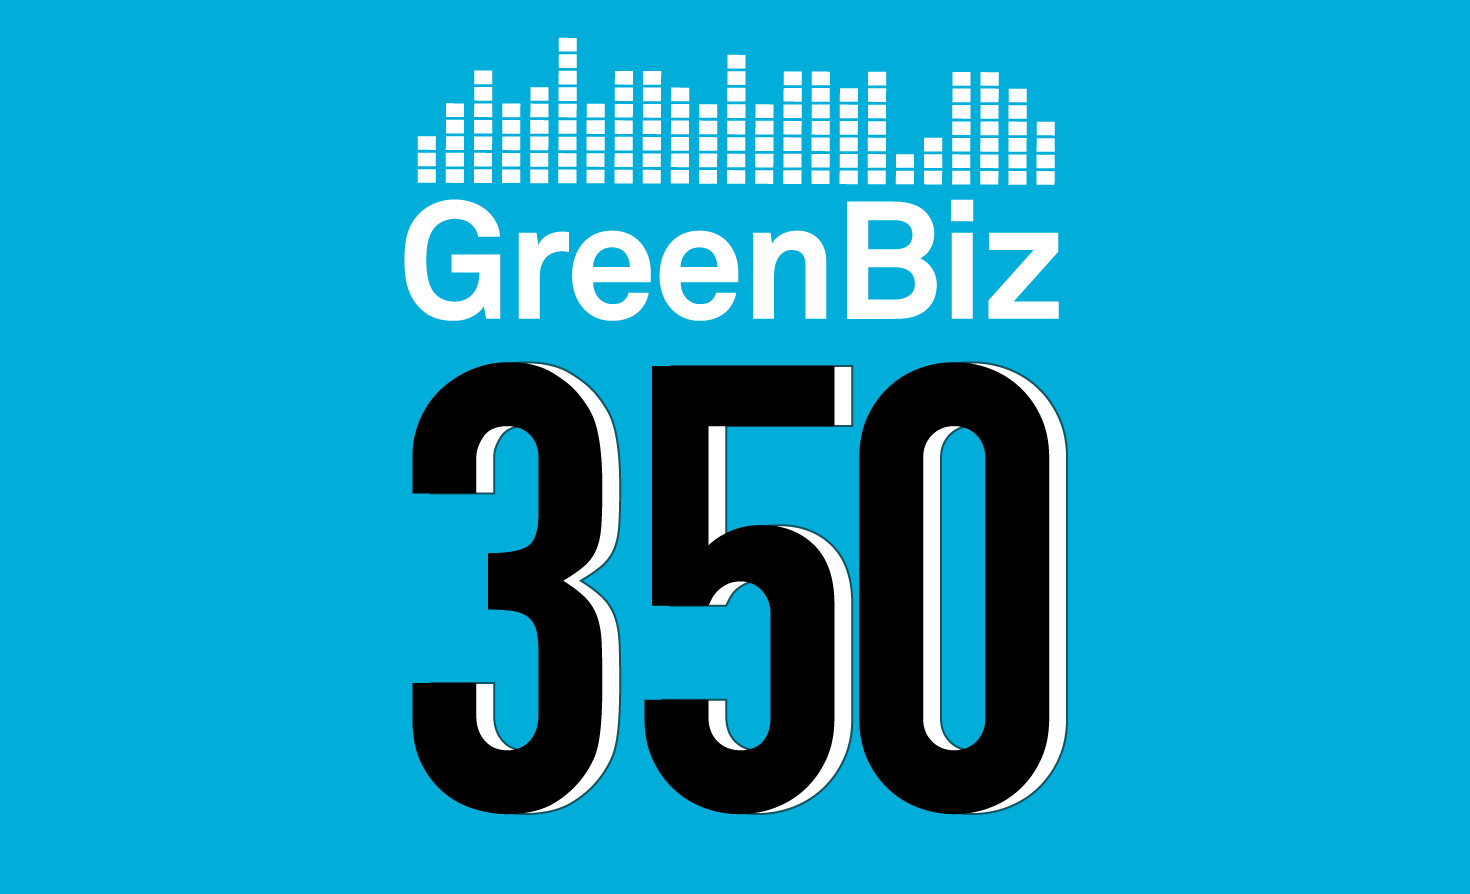 Episode 355: ESG tradition wars, classes about investing for influence